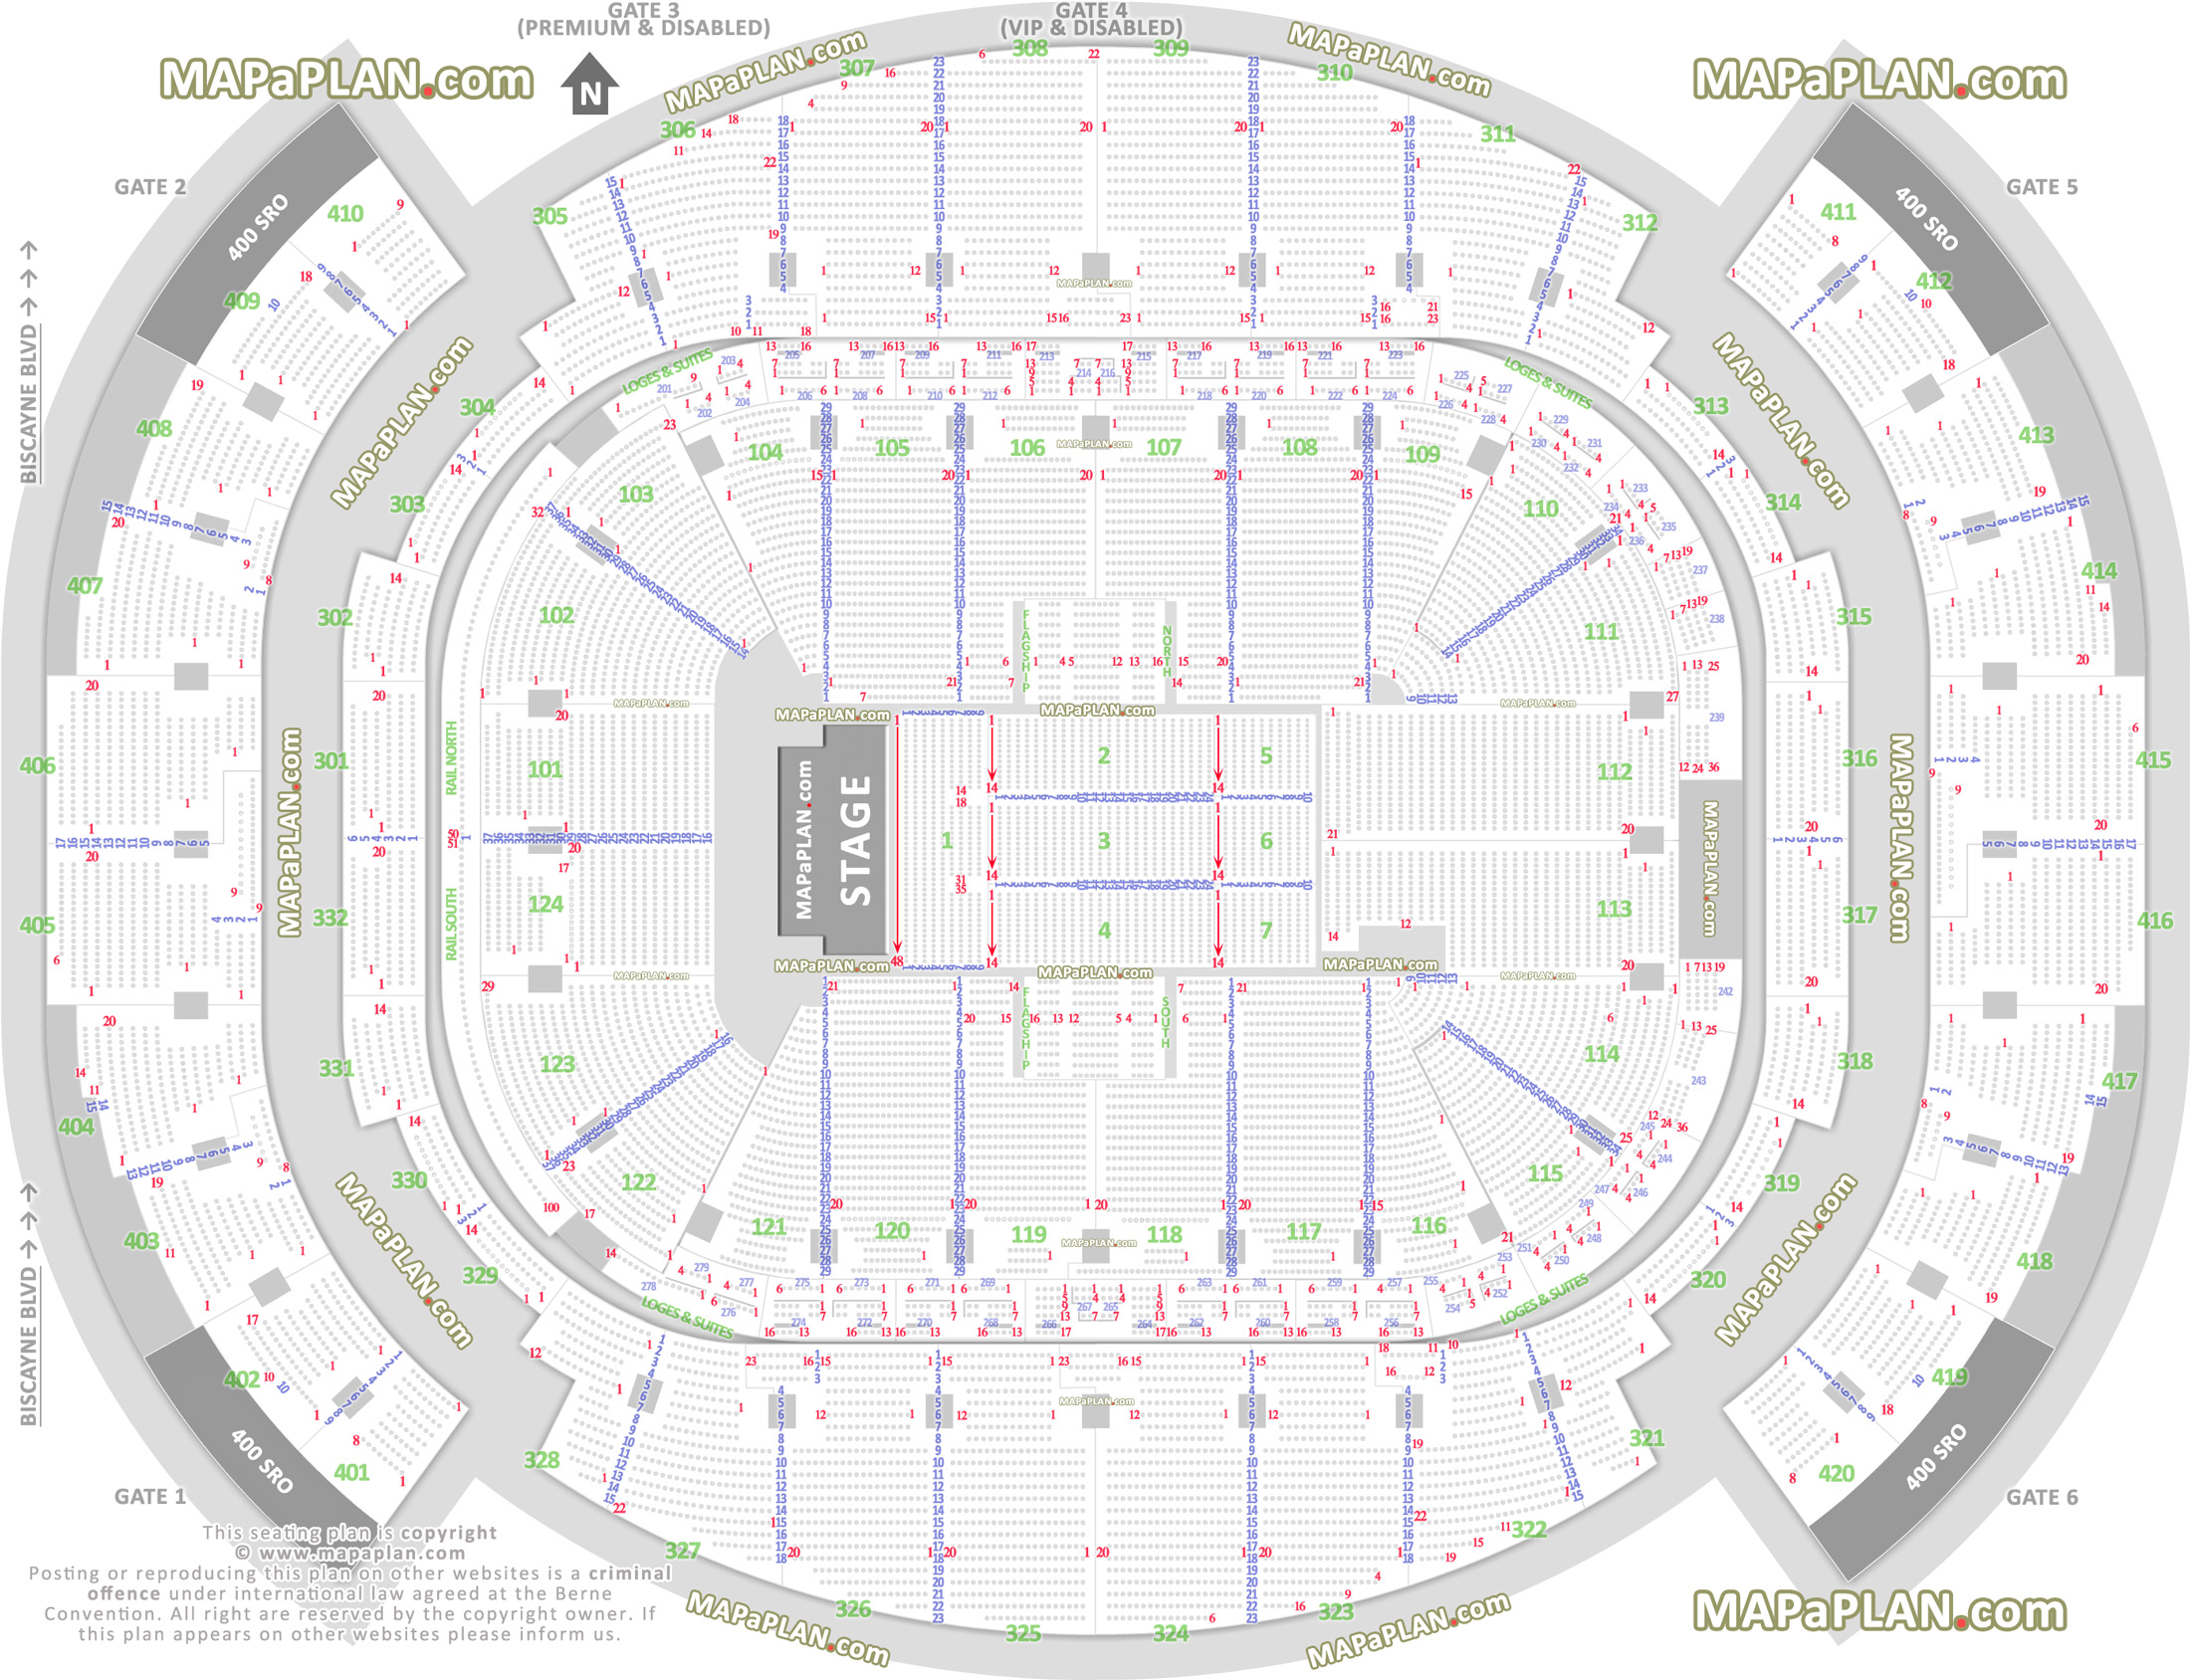 detailed seat row numbers end stage full concert sections floor plan arena lower upper level layout Miami Kaseya Center Arena seating chart